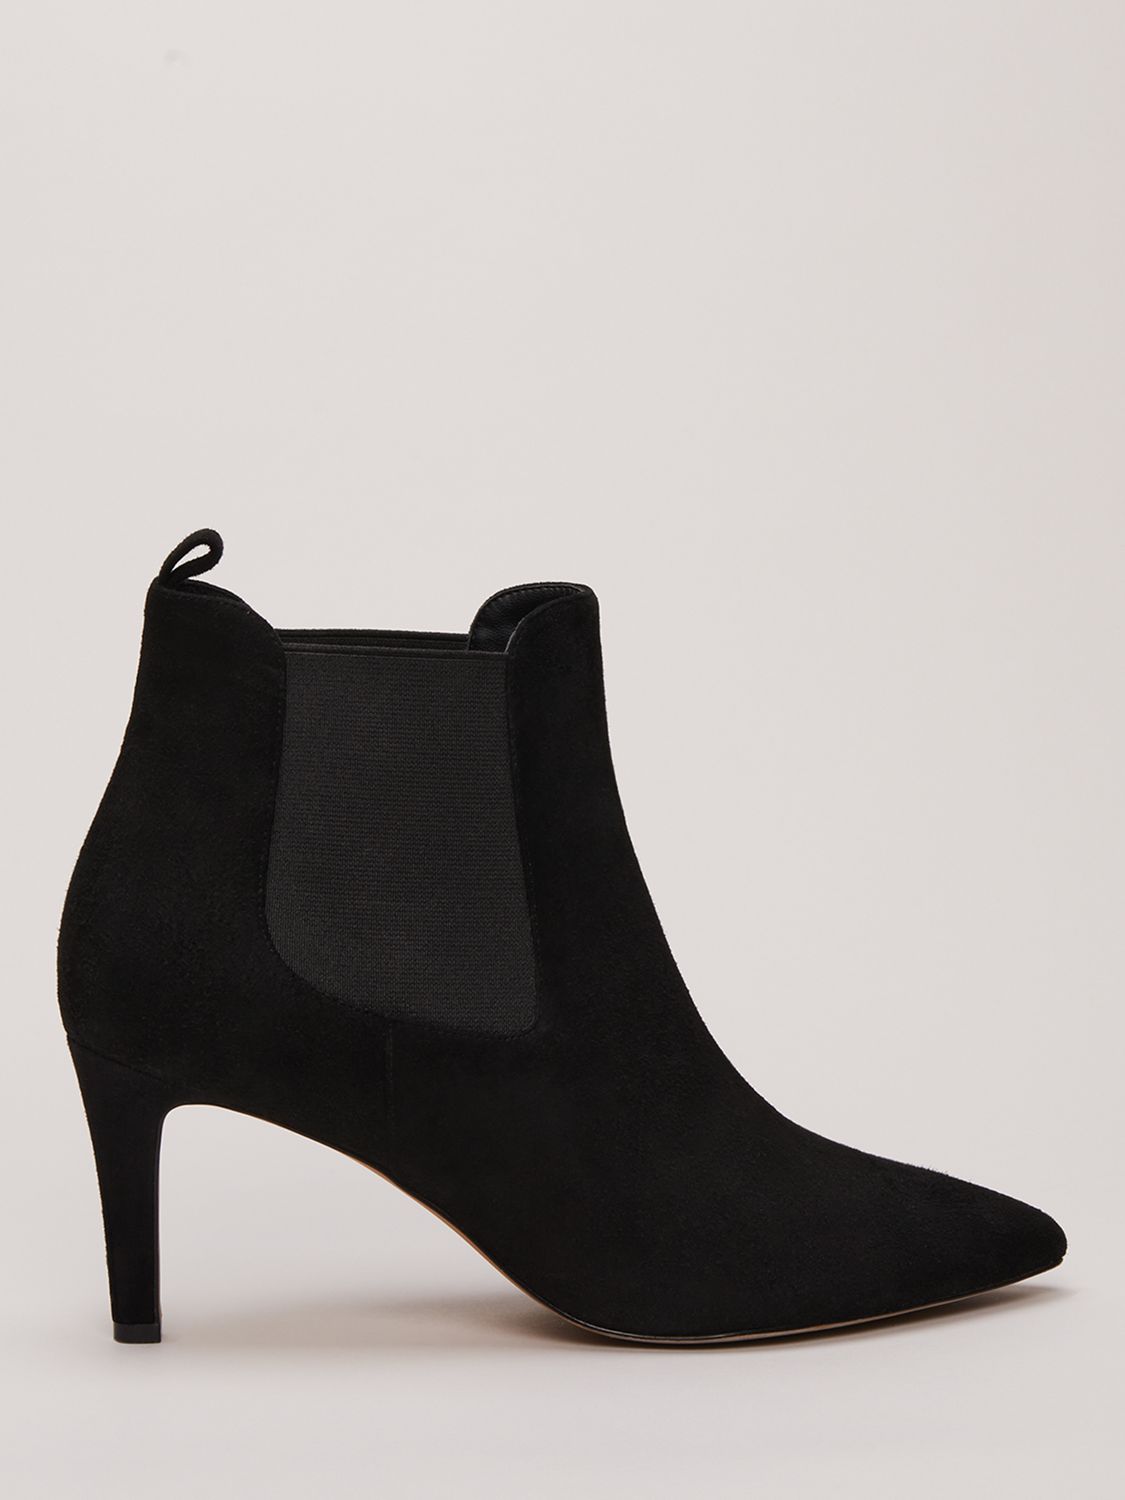 Phase Eight Suede Ankle Boots, Black at John Lewis & Partners